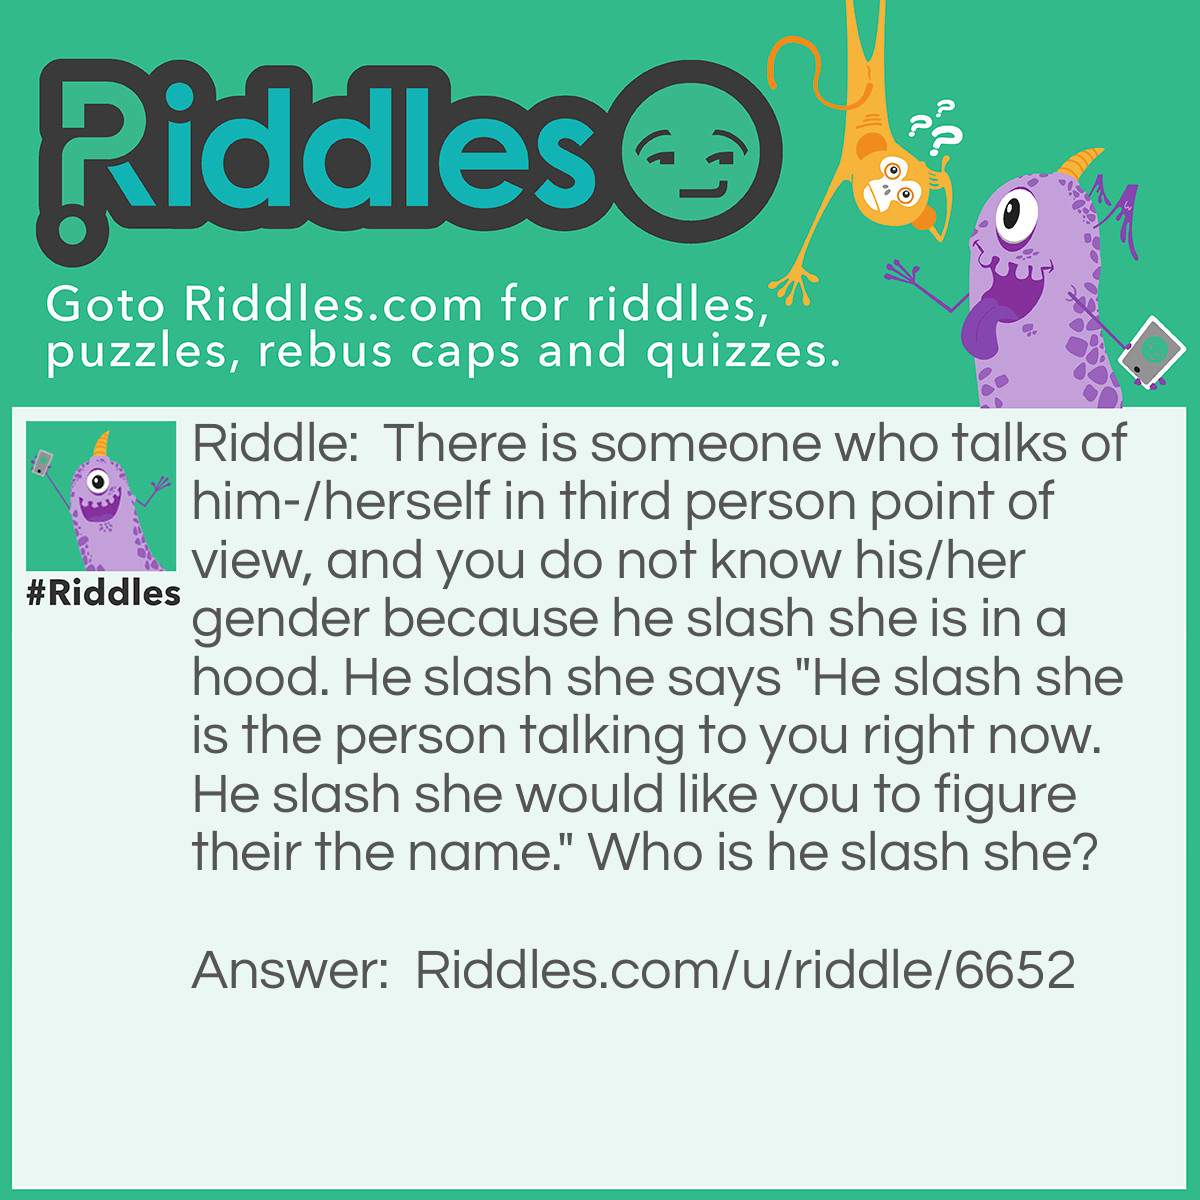 Riddle: There is someone who talks of him-/herself in third person point of view, and you do not know his/her gender because he slash she is in a hood. He slash she says "He slash she is the person talking to you right now. He slash she would like you to figure their the name." Who is he slash she? Answer: The name is He Slash She It is a very rare name, but you must admit it is possible.